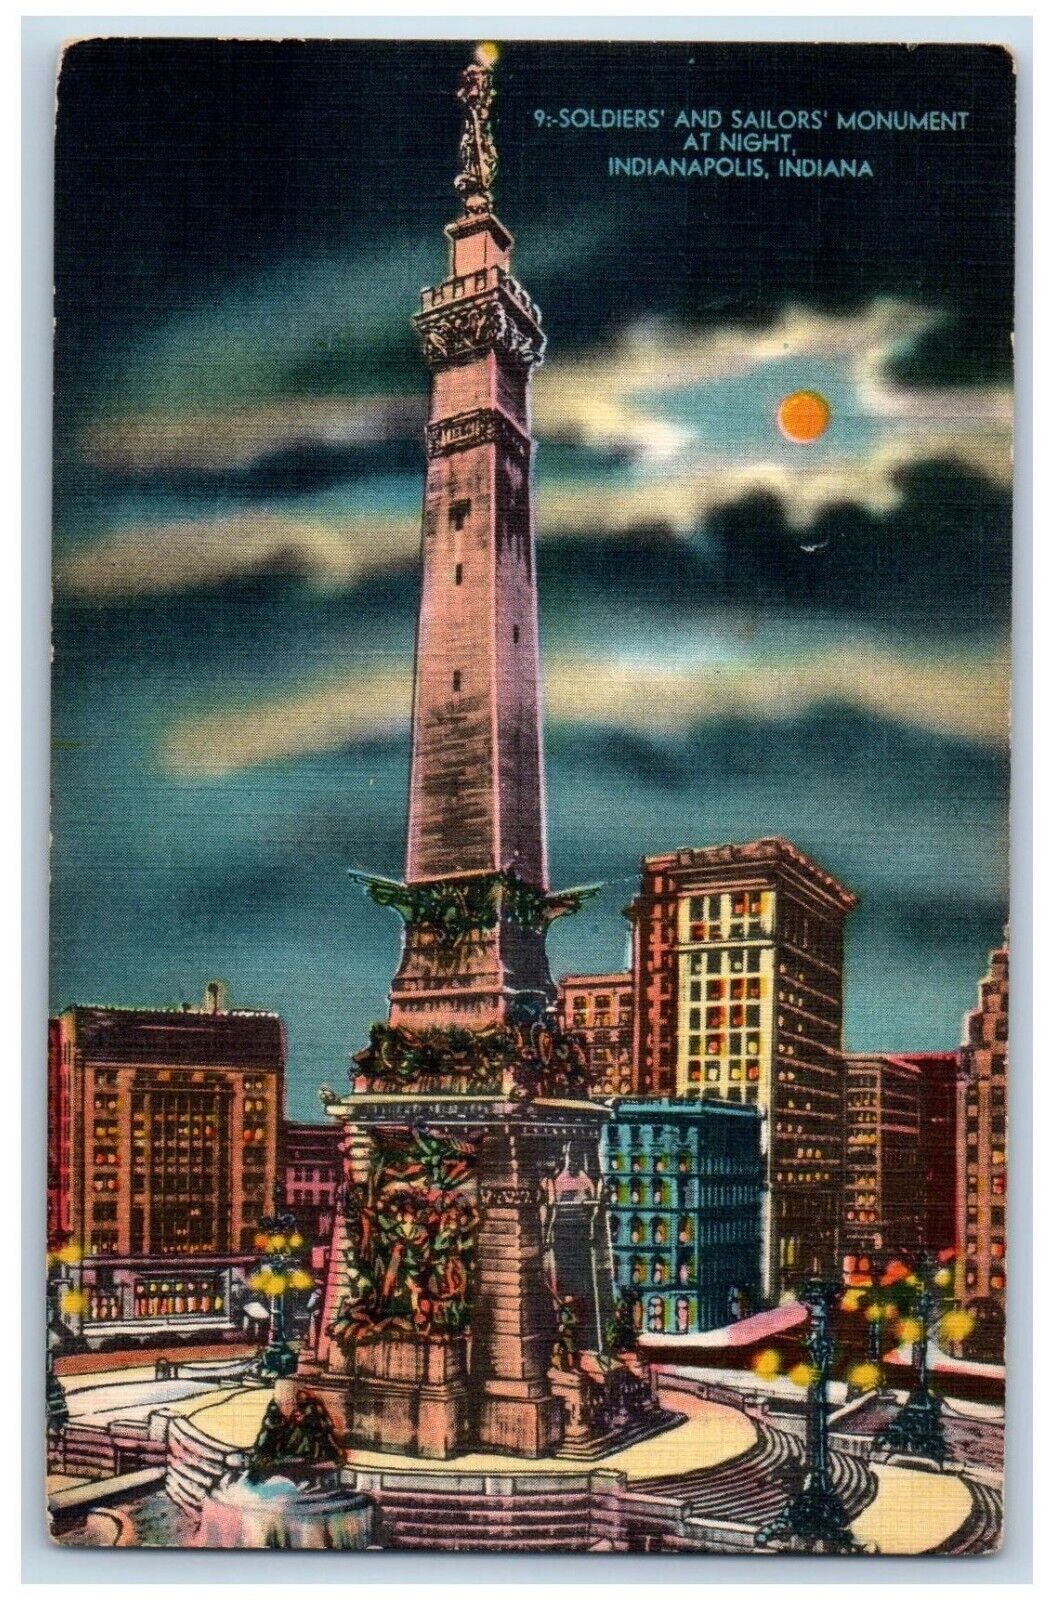 Indianapolis Indiana IN Postcard Soldiers Sailors Monument Night c1940 Vintage